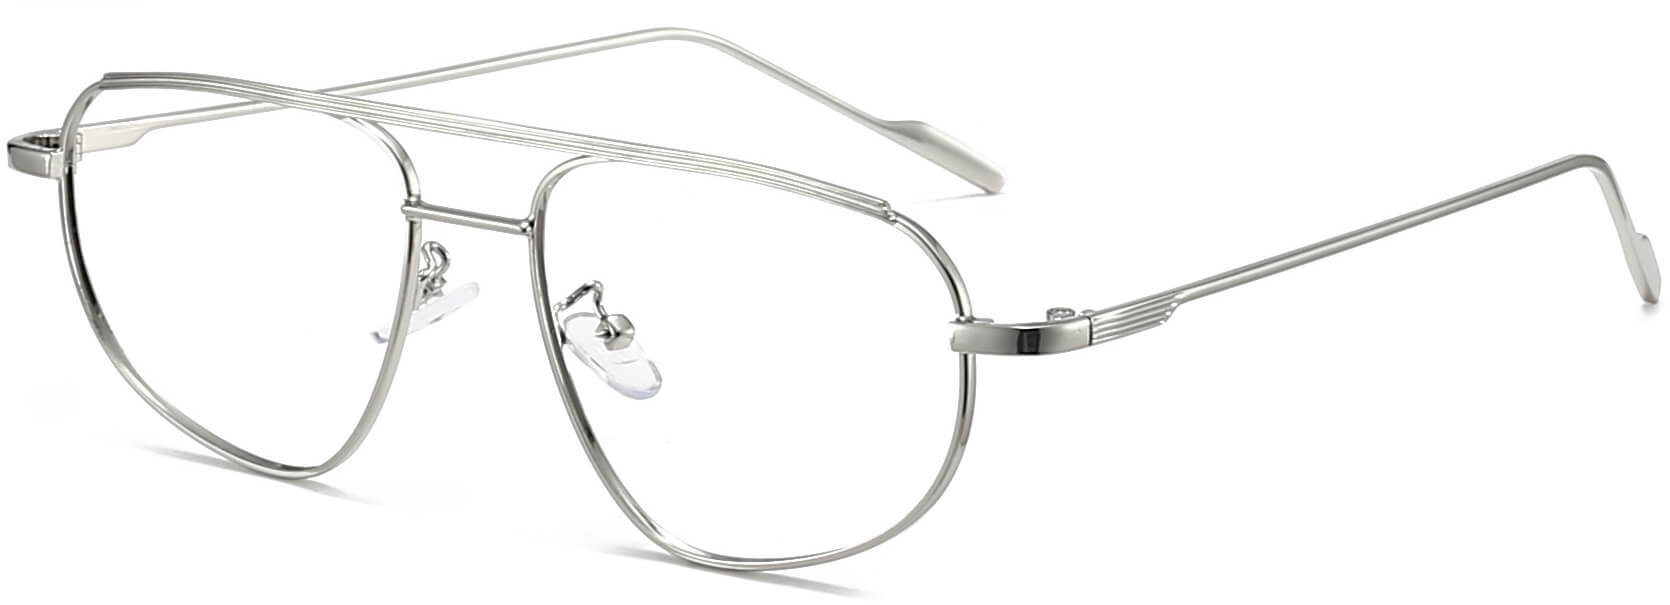 Lachlan Geometric SilverEyeglasses from ANRRI, angle view